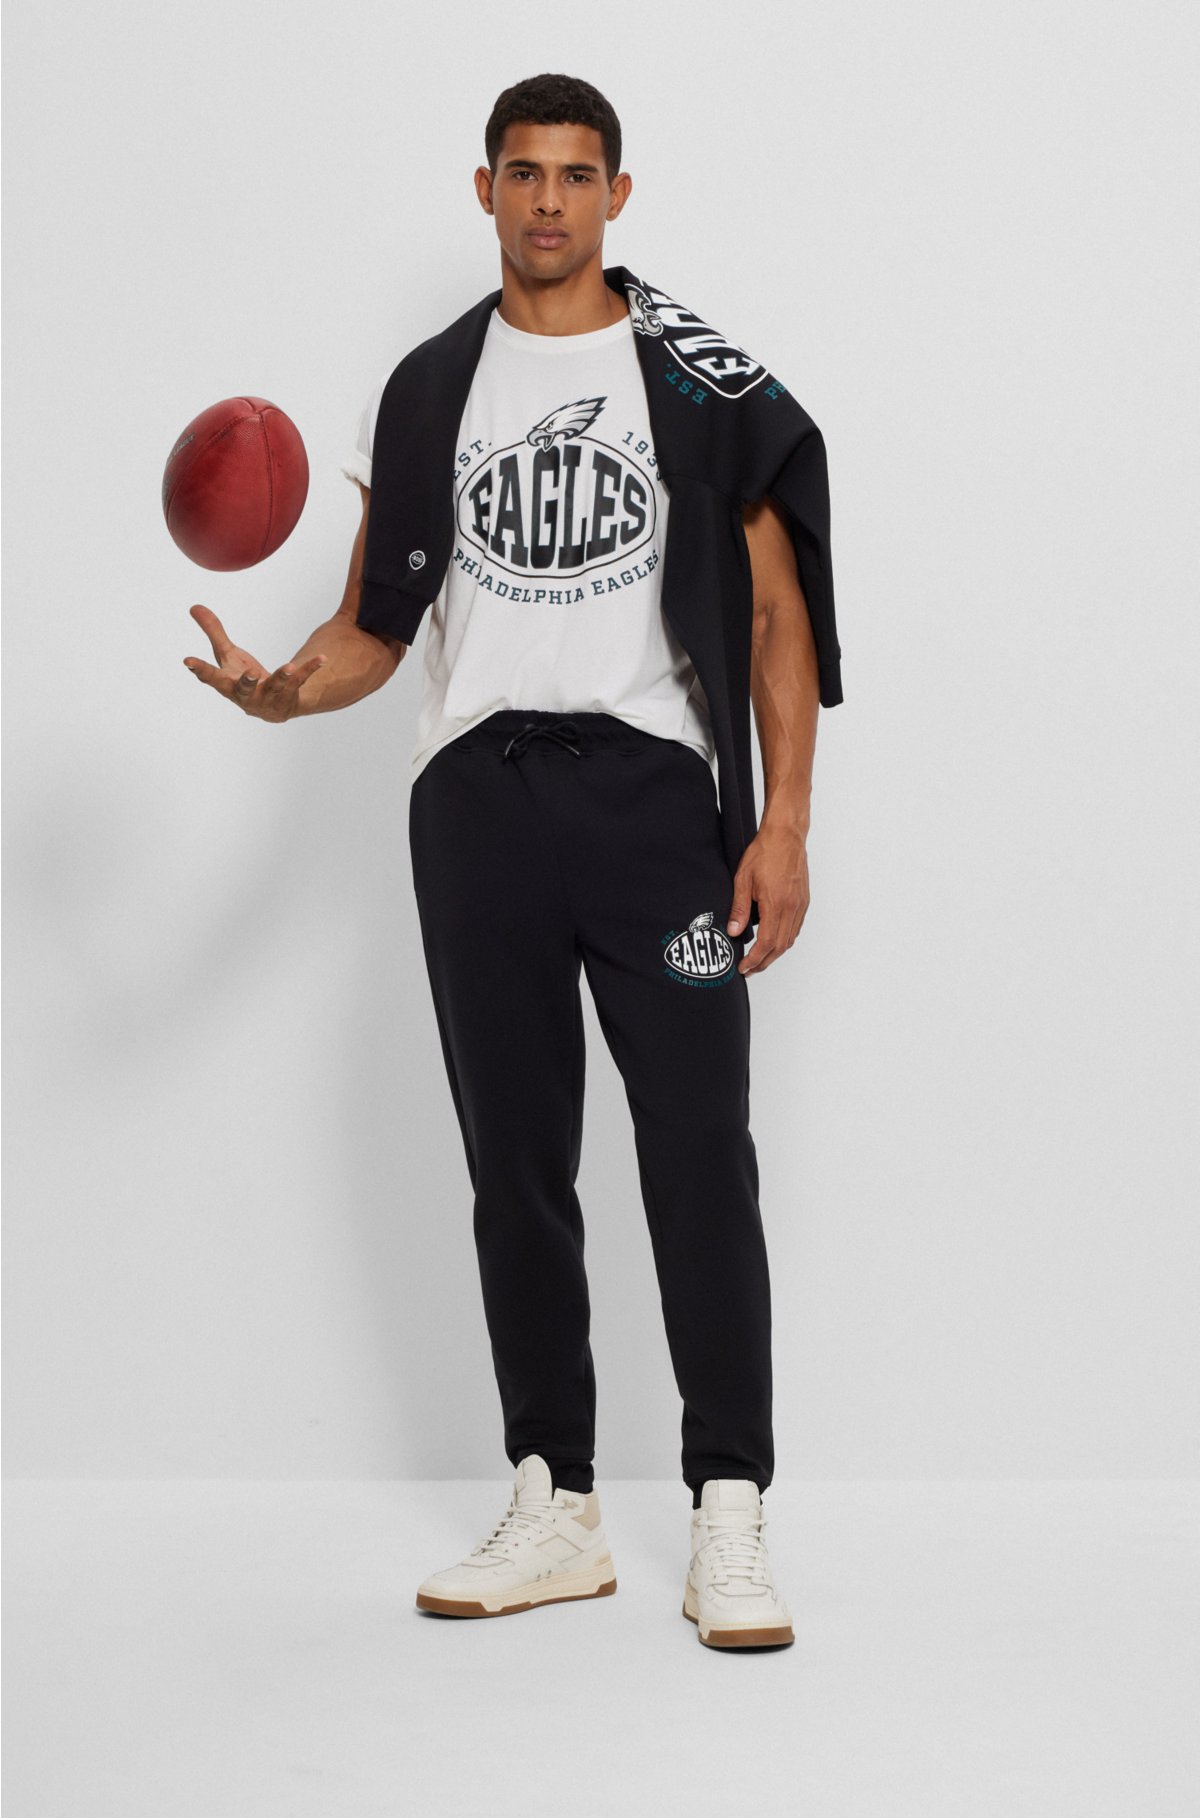  BOSS x NFL stretch-cotton T-shirt with collaborative branding, Eagles